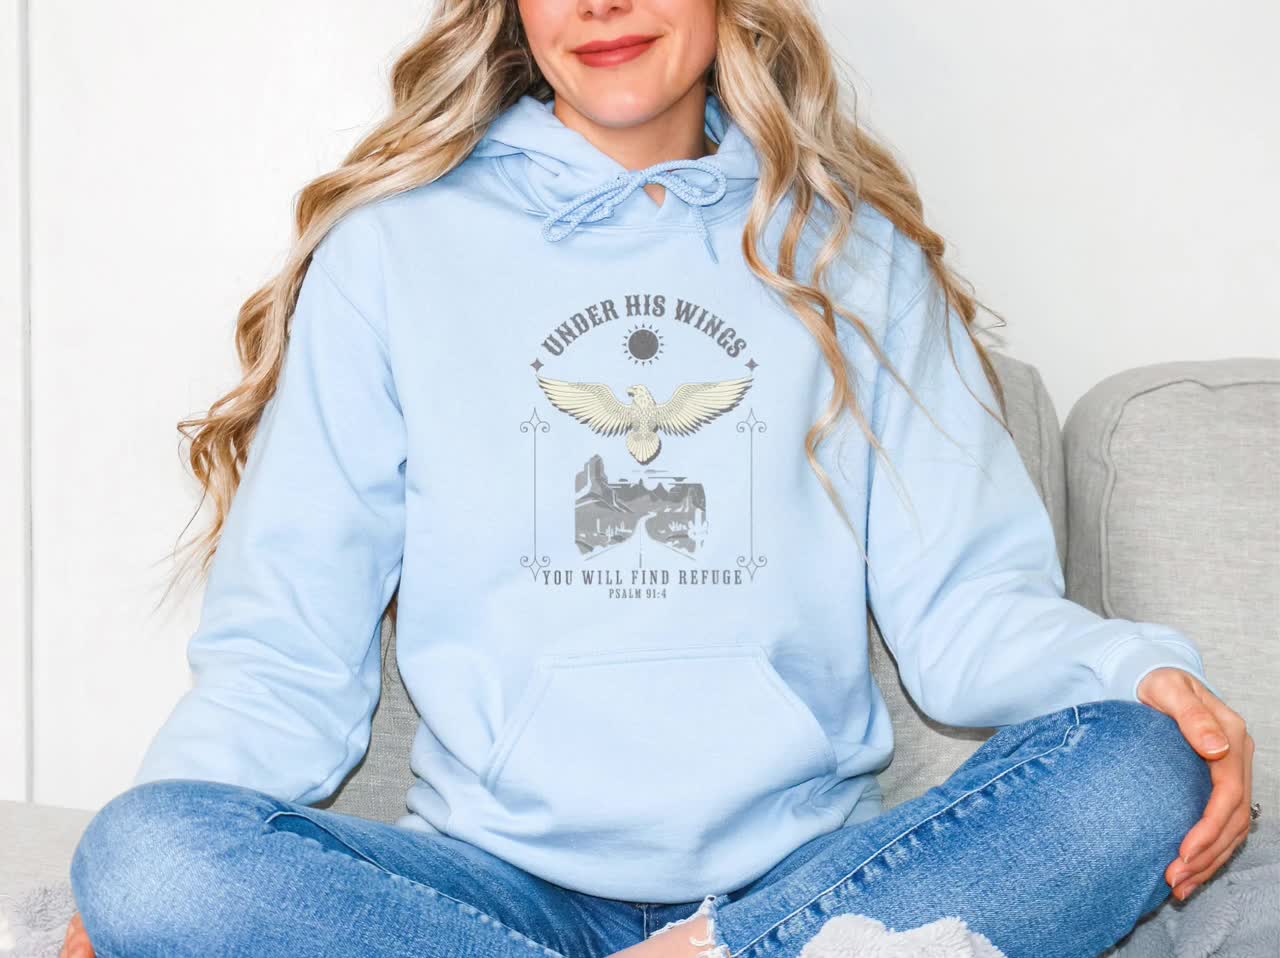 Christian Hoodie or for or Gift Christian Hooded Men Gift Etsy Women. Sweatshirt. Gift, Birthday a Gift, for to - Send Clothing as Christian